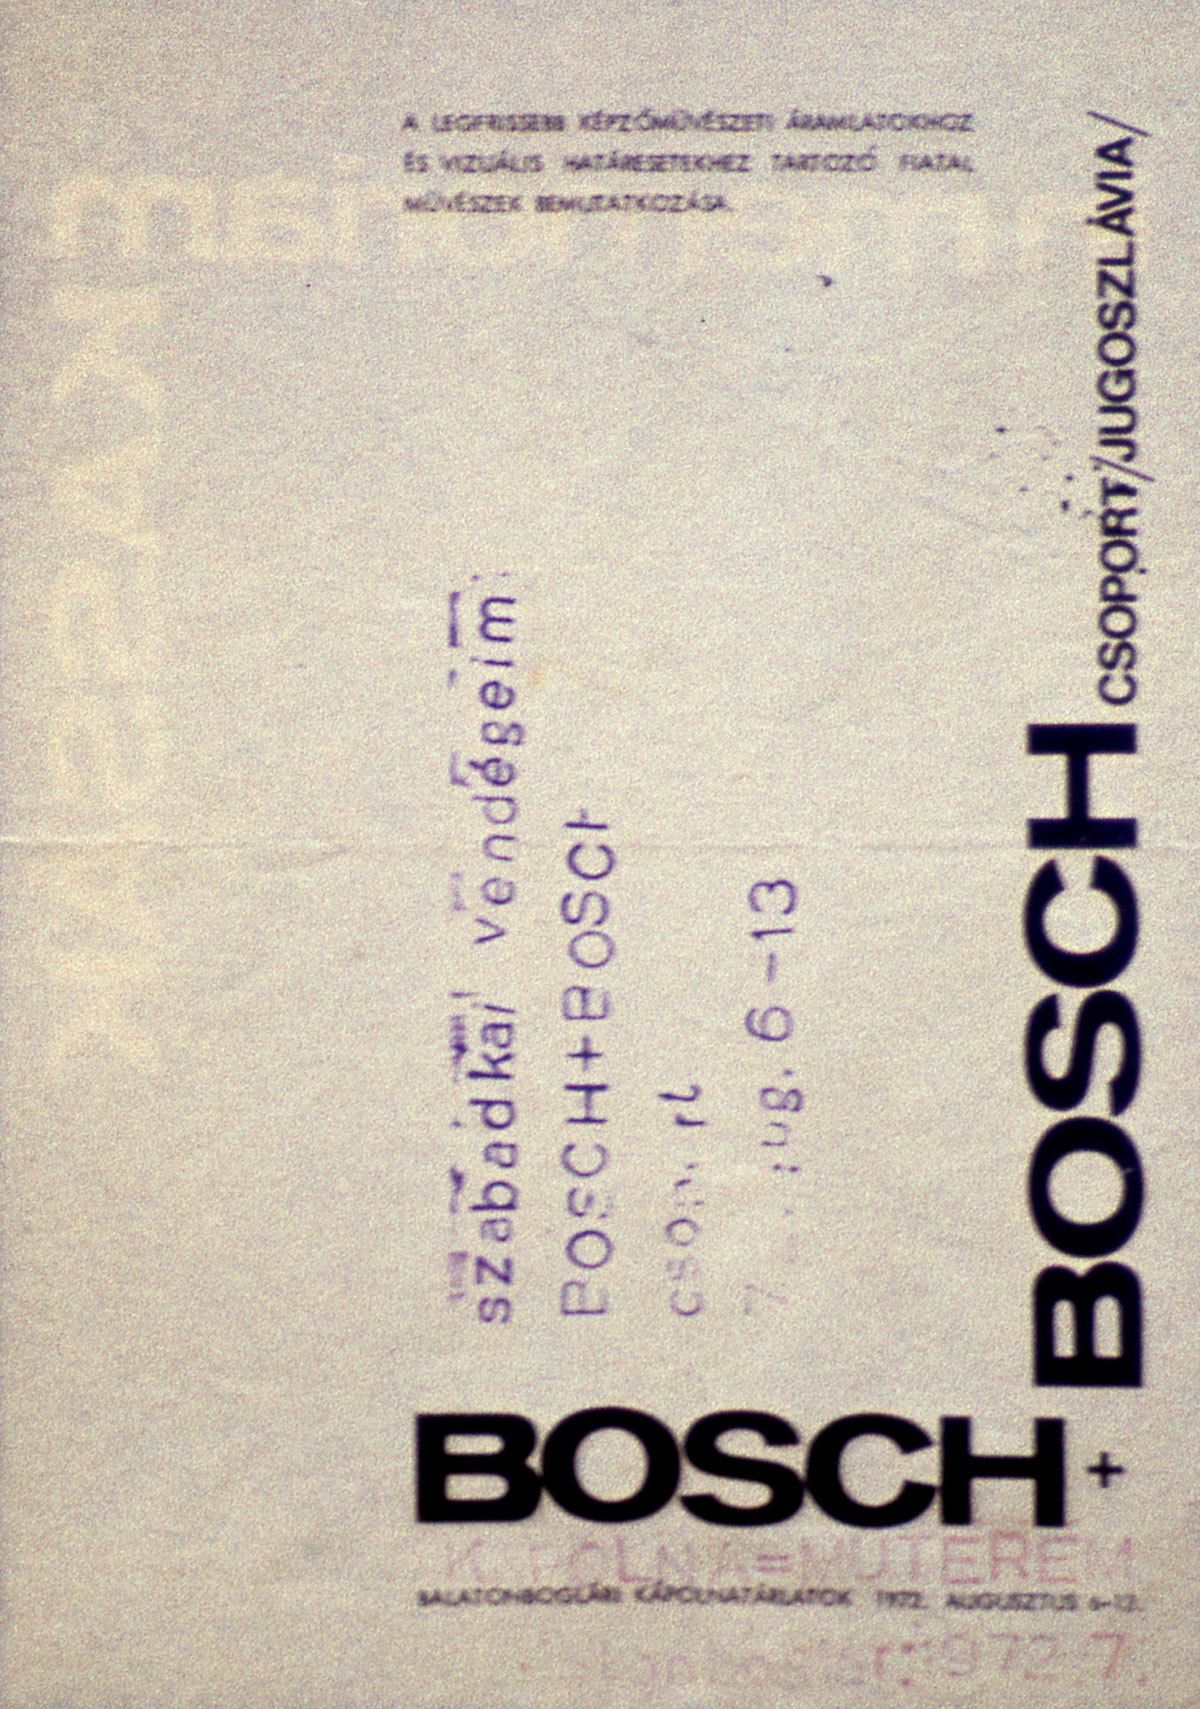 Documents of the exhibition by the Bosch + Bosch group from Yugoslavia